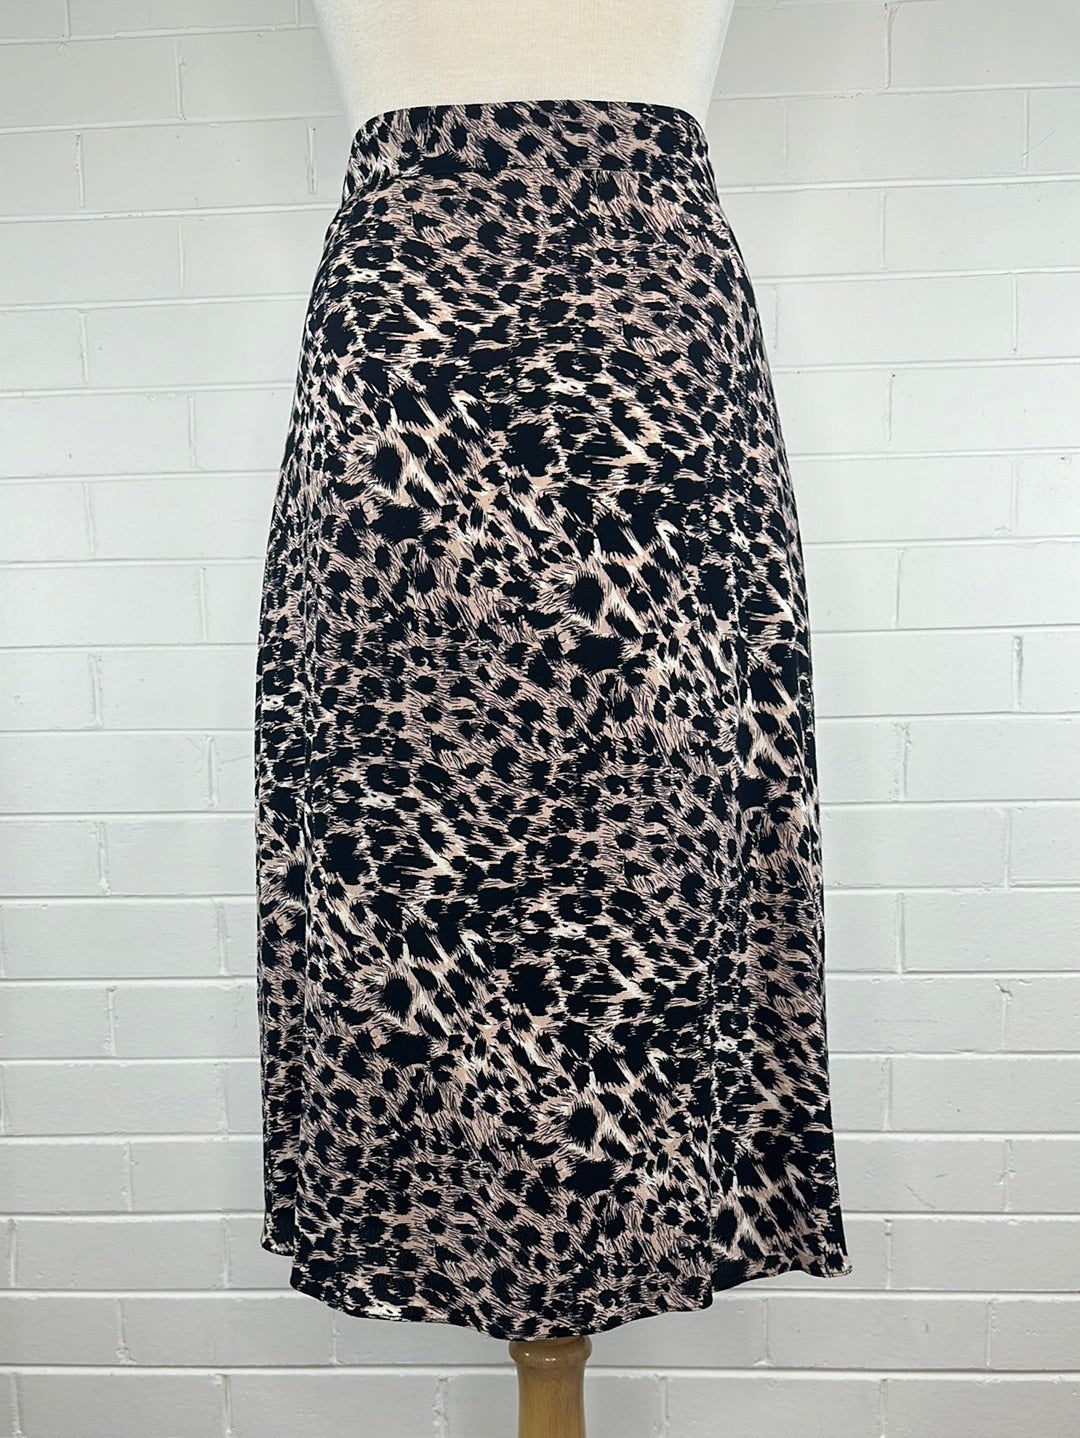 Oxford | skirt | size 10 | midi length | new with tags